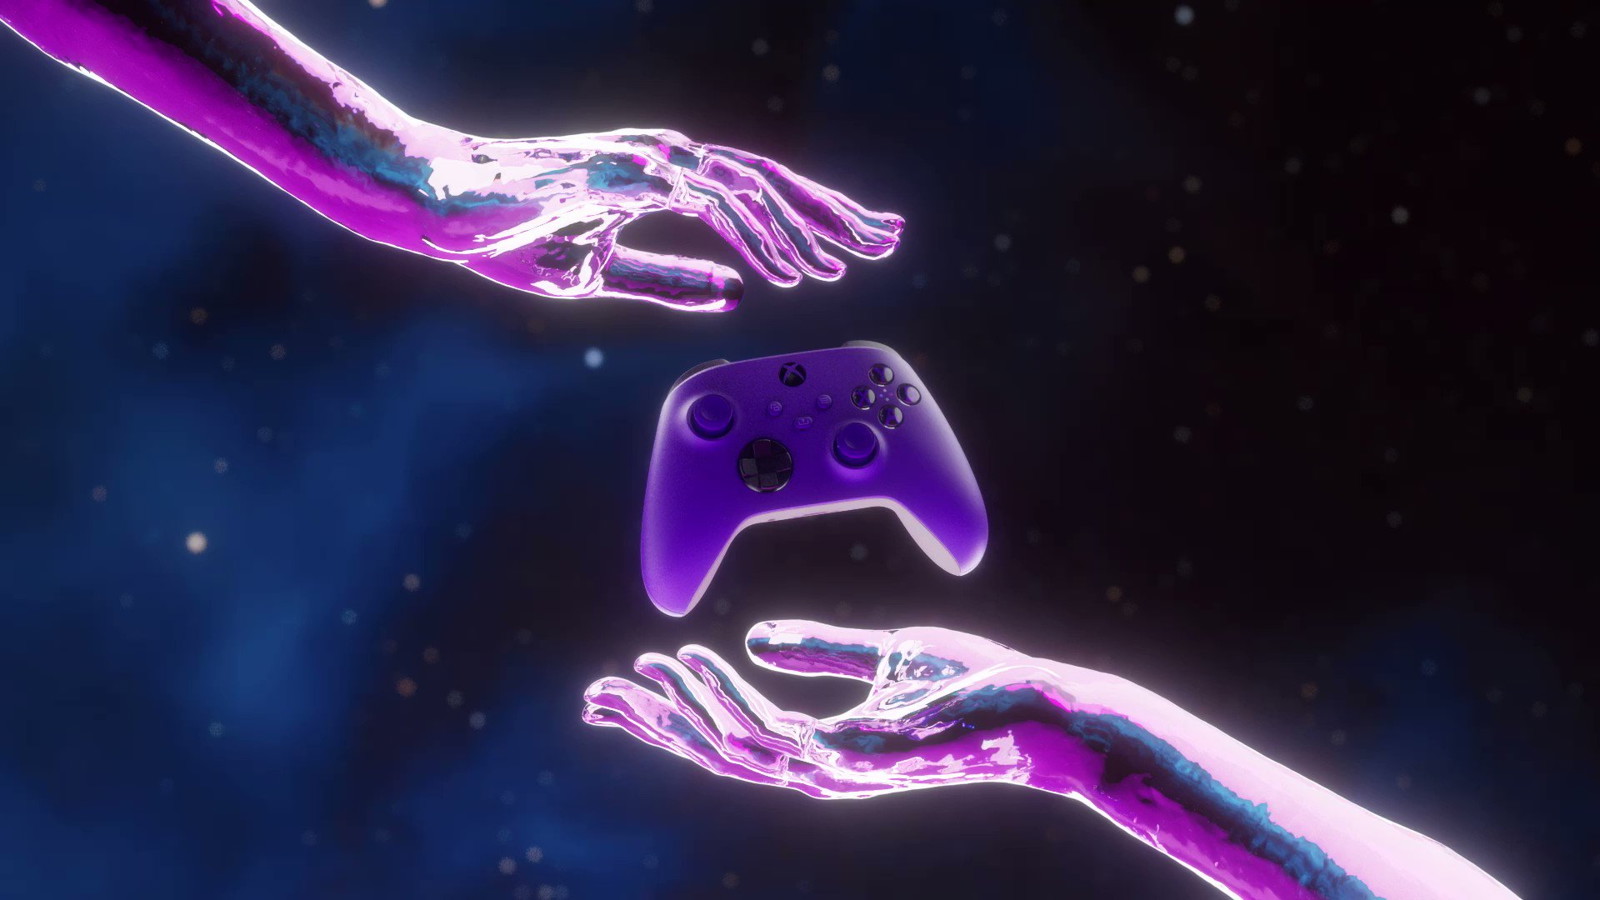 Microsoft goes into space with its new Astral Purple Xbox Controller, which can be pre-ordered now.